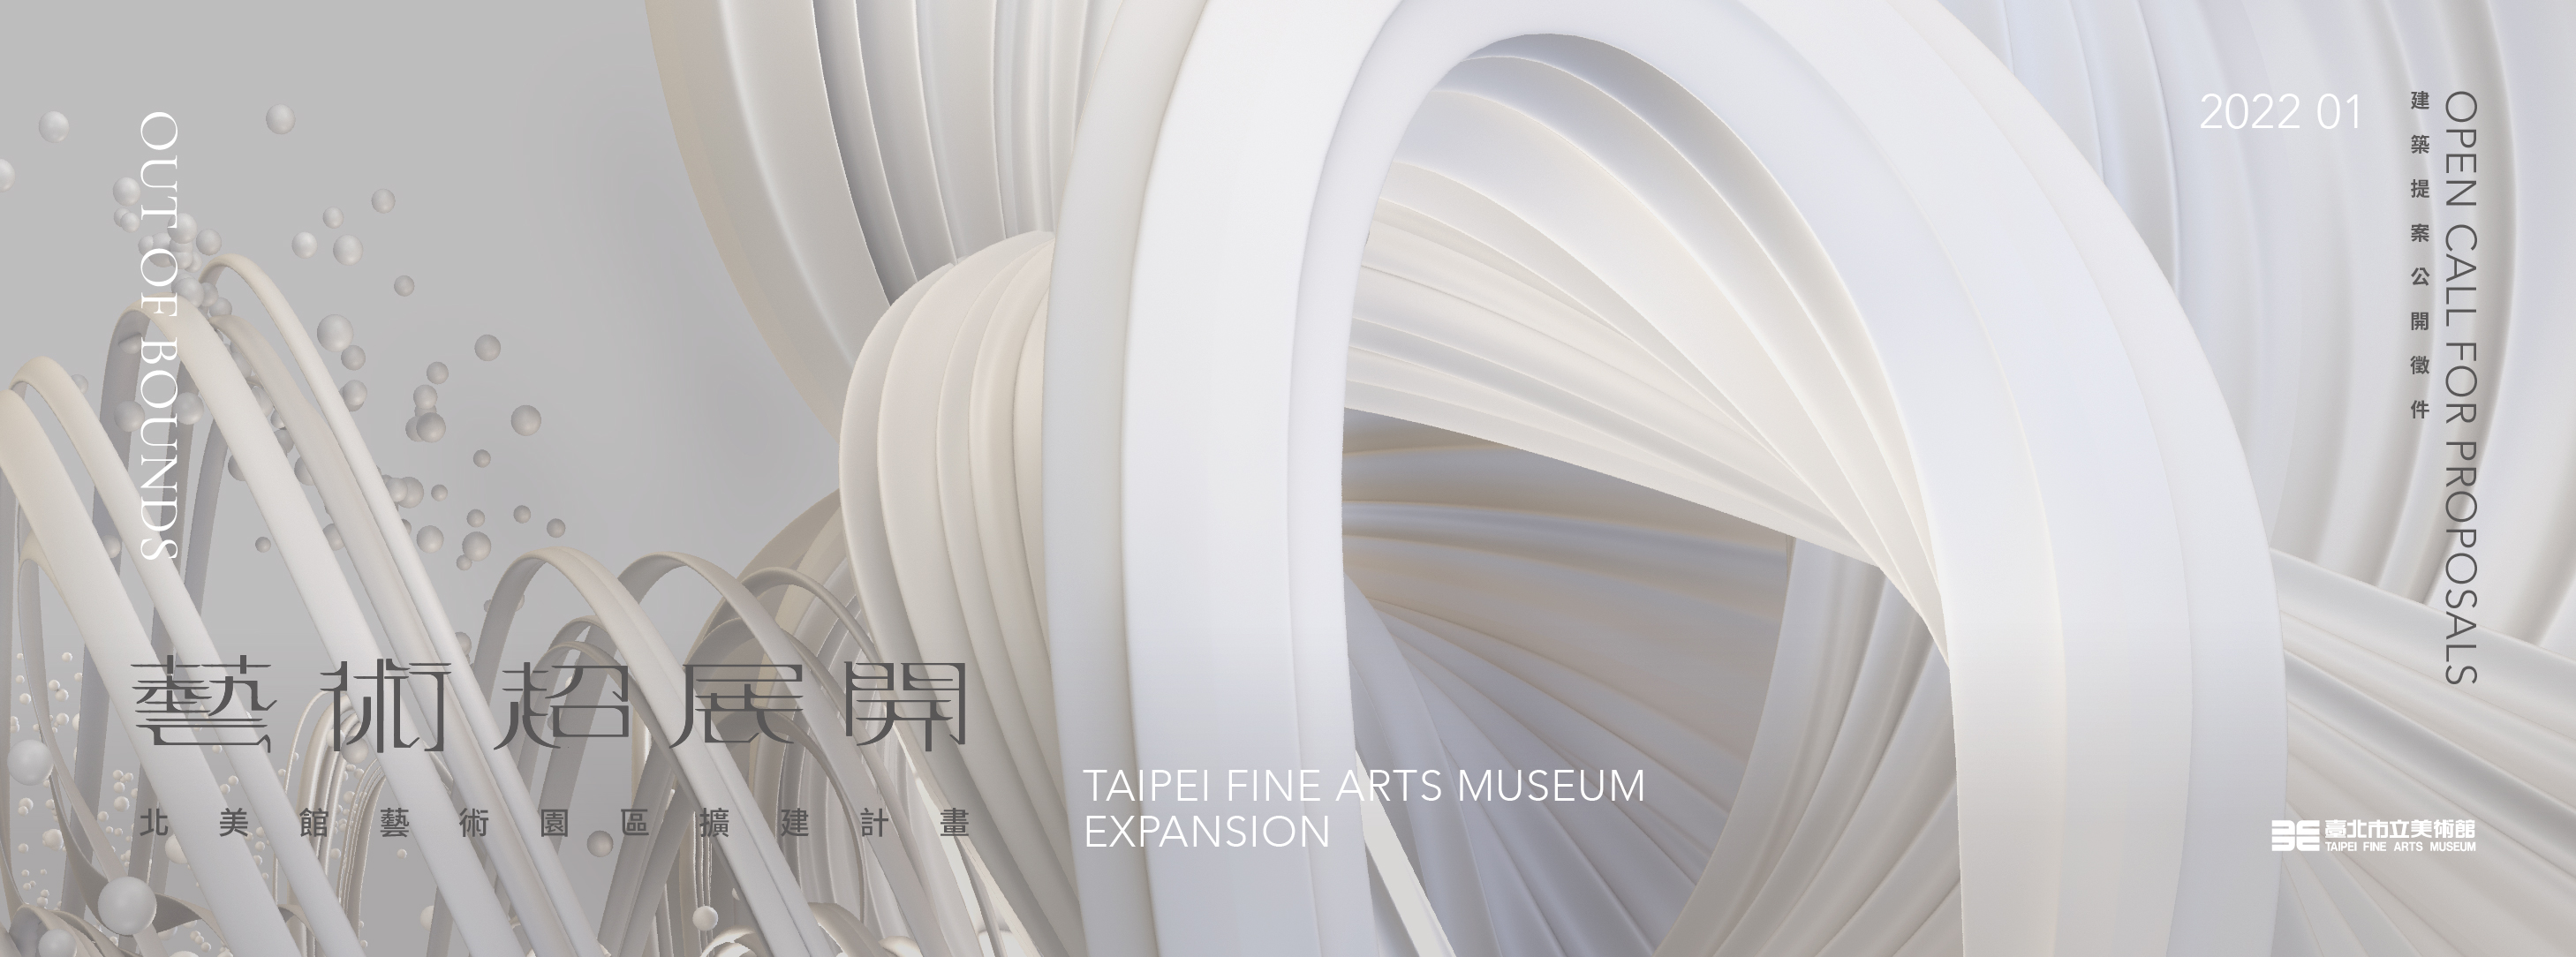 Out of Bounds: TFAM Expansion Moving beyond imagination, expanding art into the unknown 的圖說